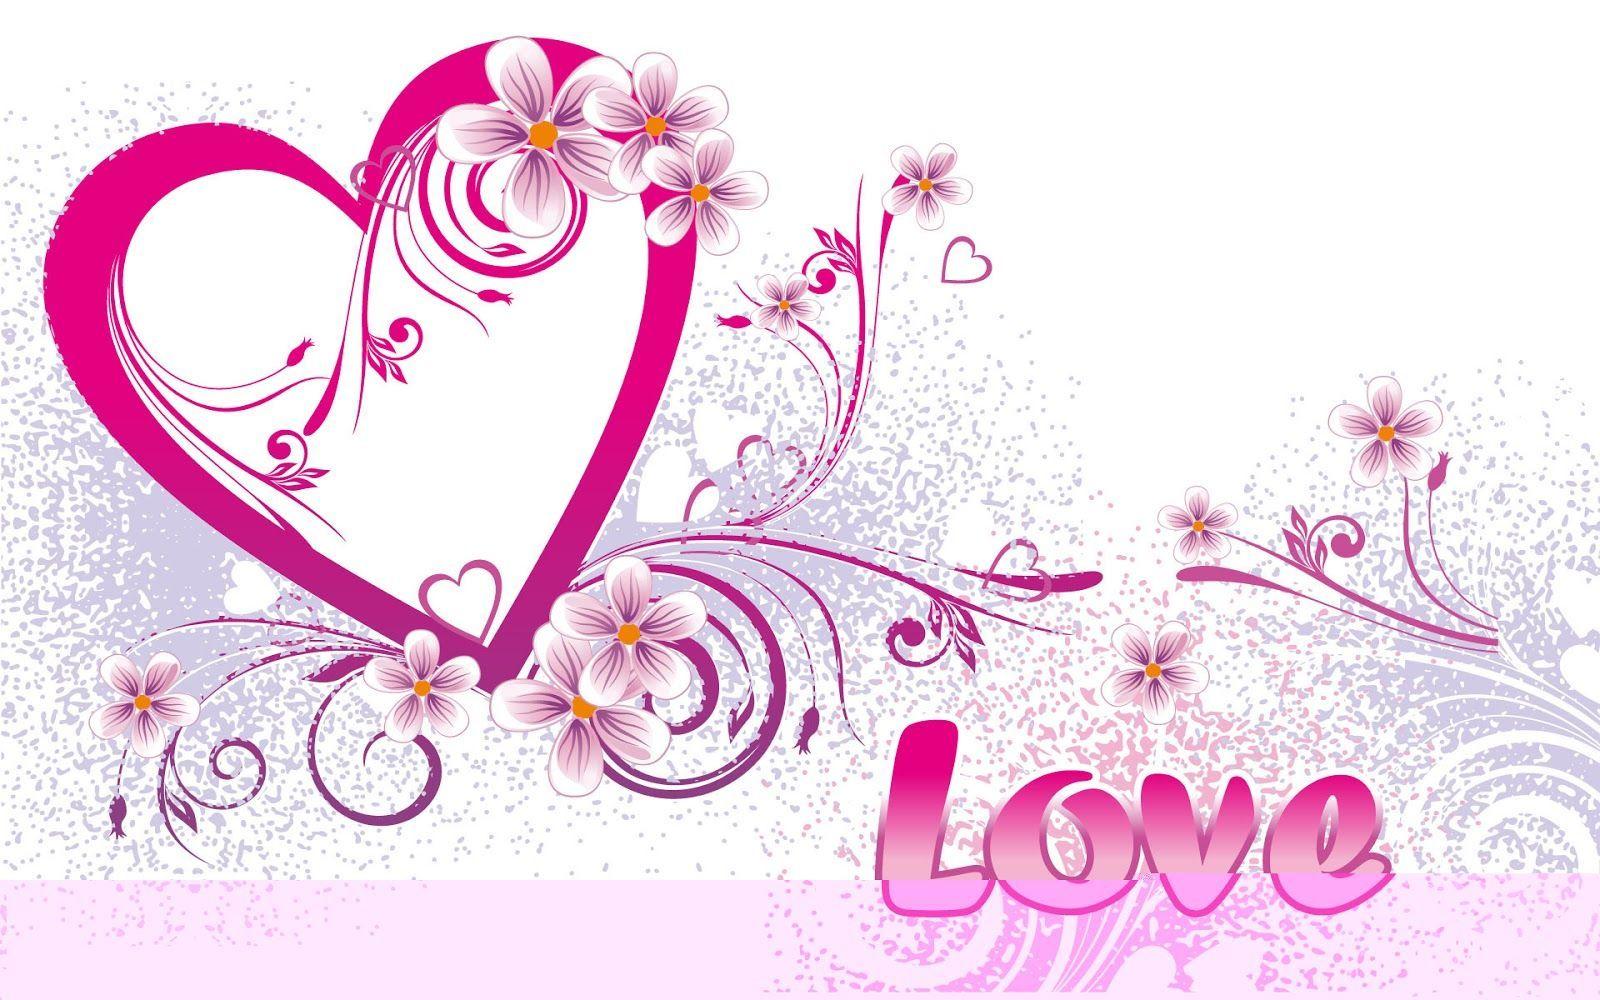 Wallpaper Background: Cute Heart and Love Wallpaper